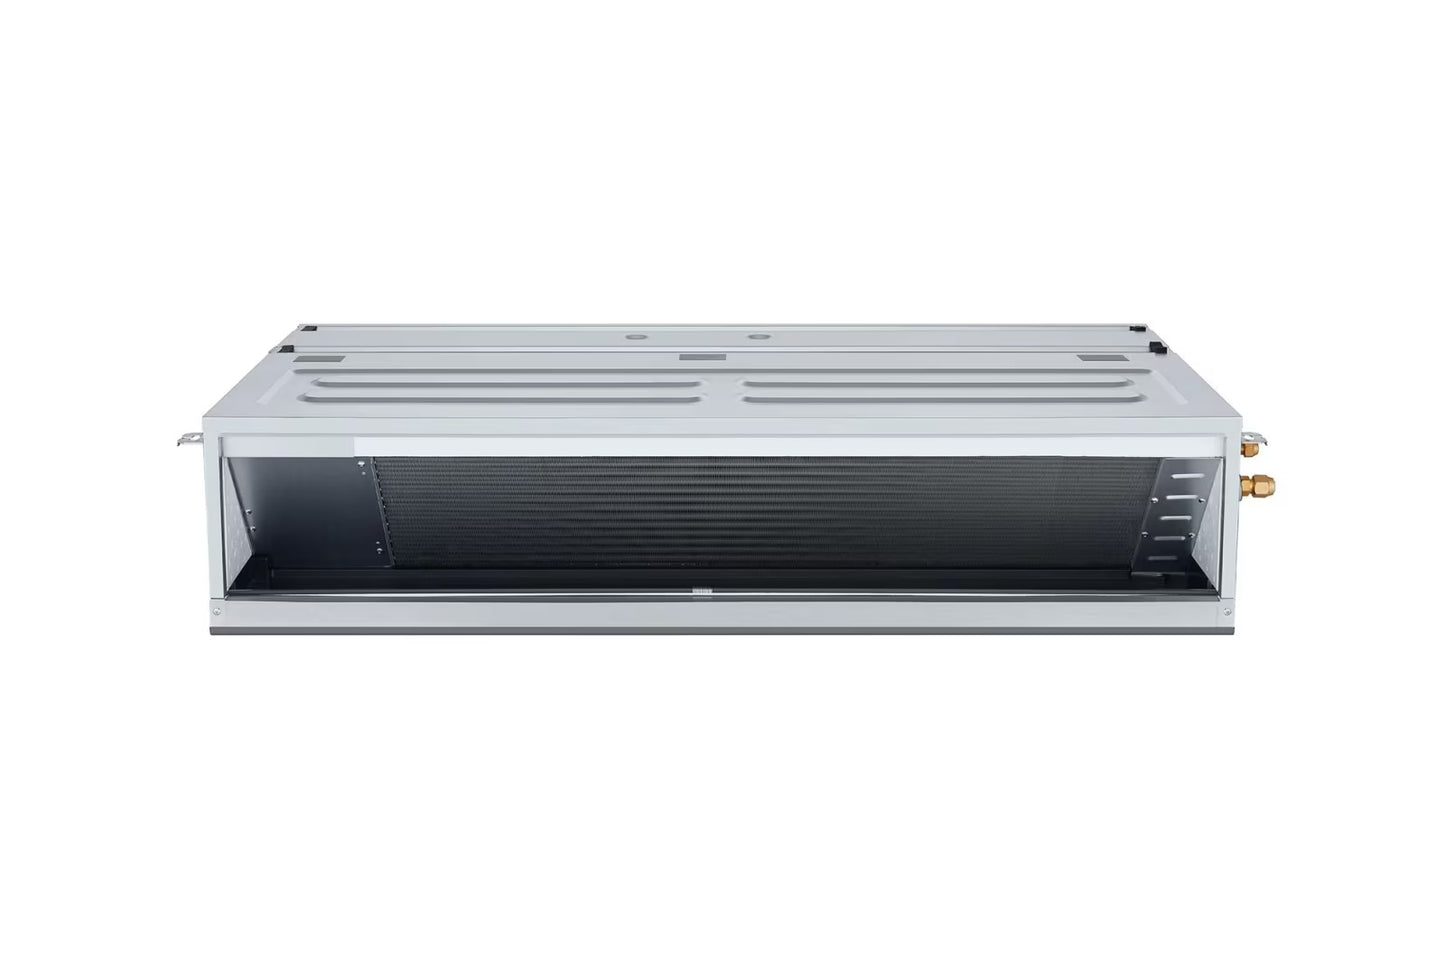 LG Ceiling Concealed Duct INV Unit 2.2KW with High Static and E.S.P. Control for Multiple Rooms - ARNU07GBHA2